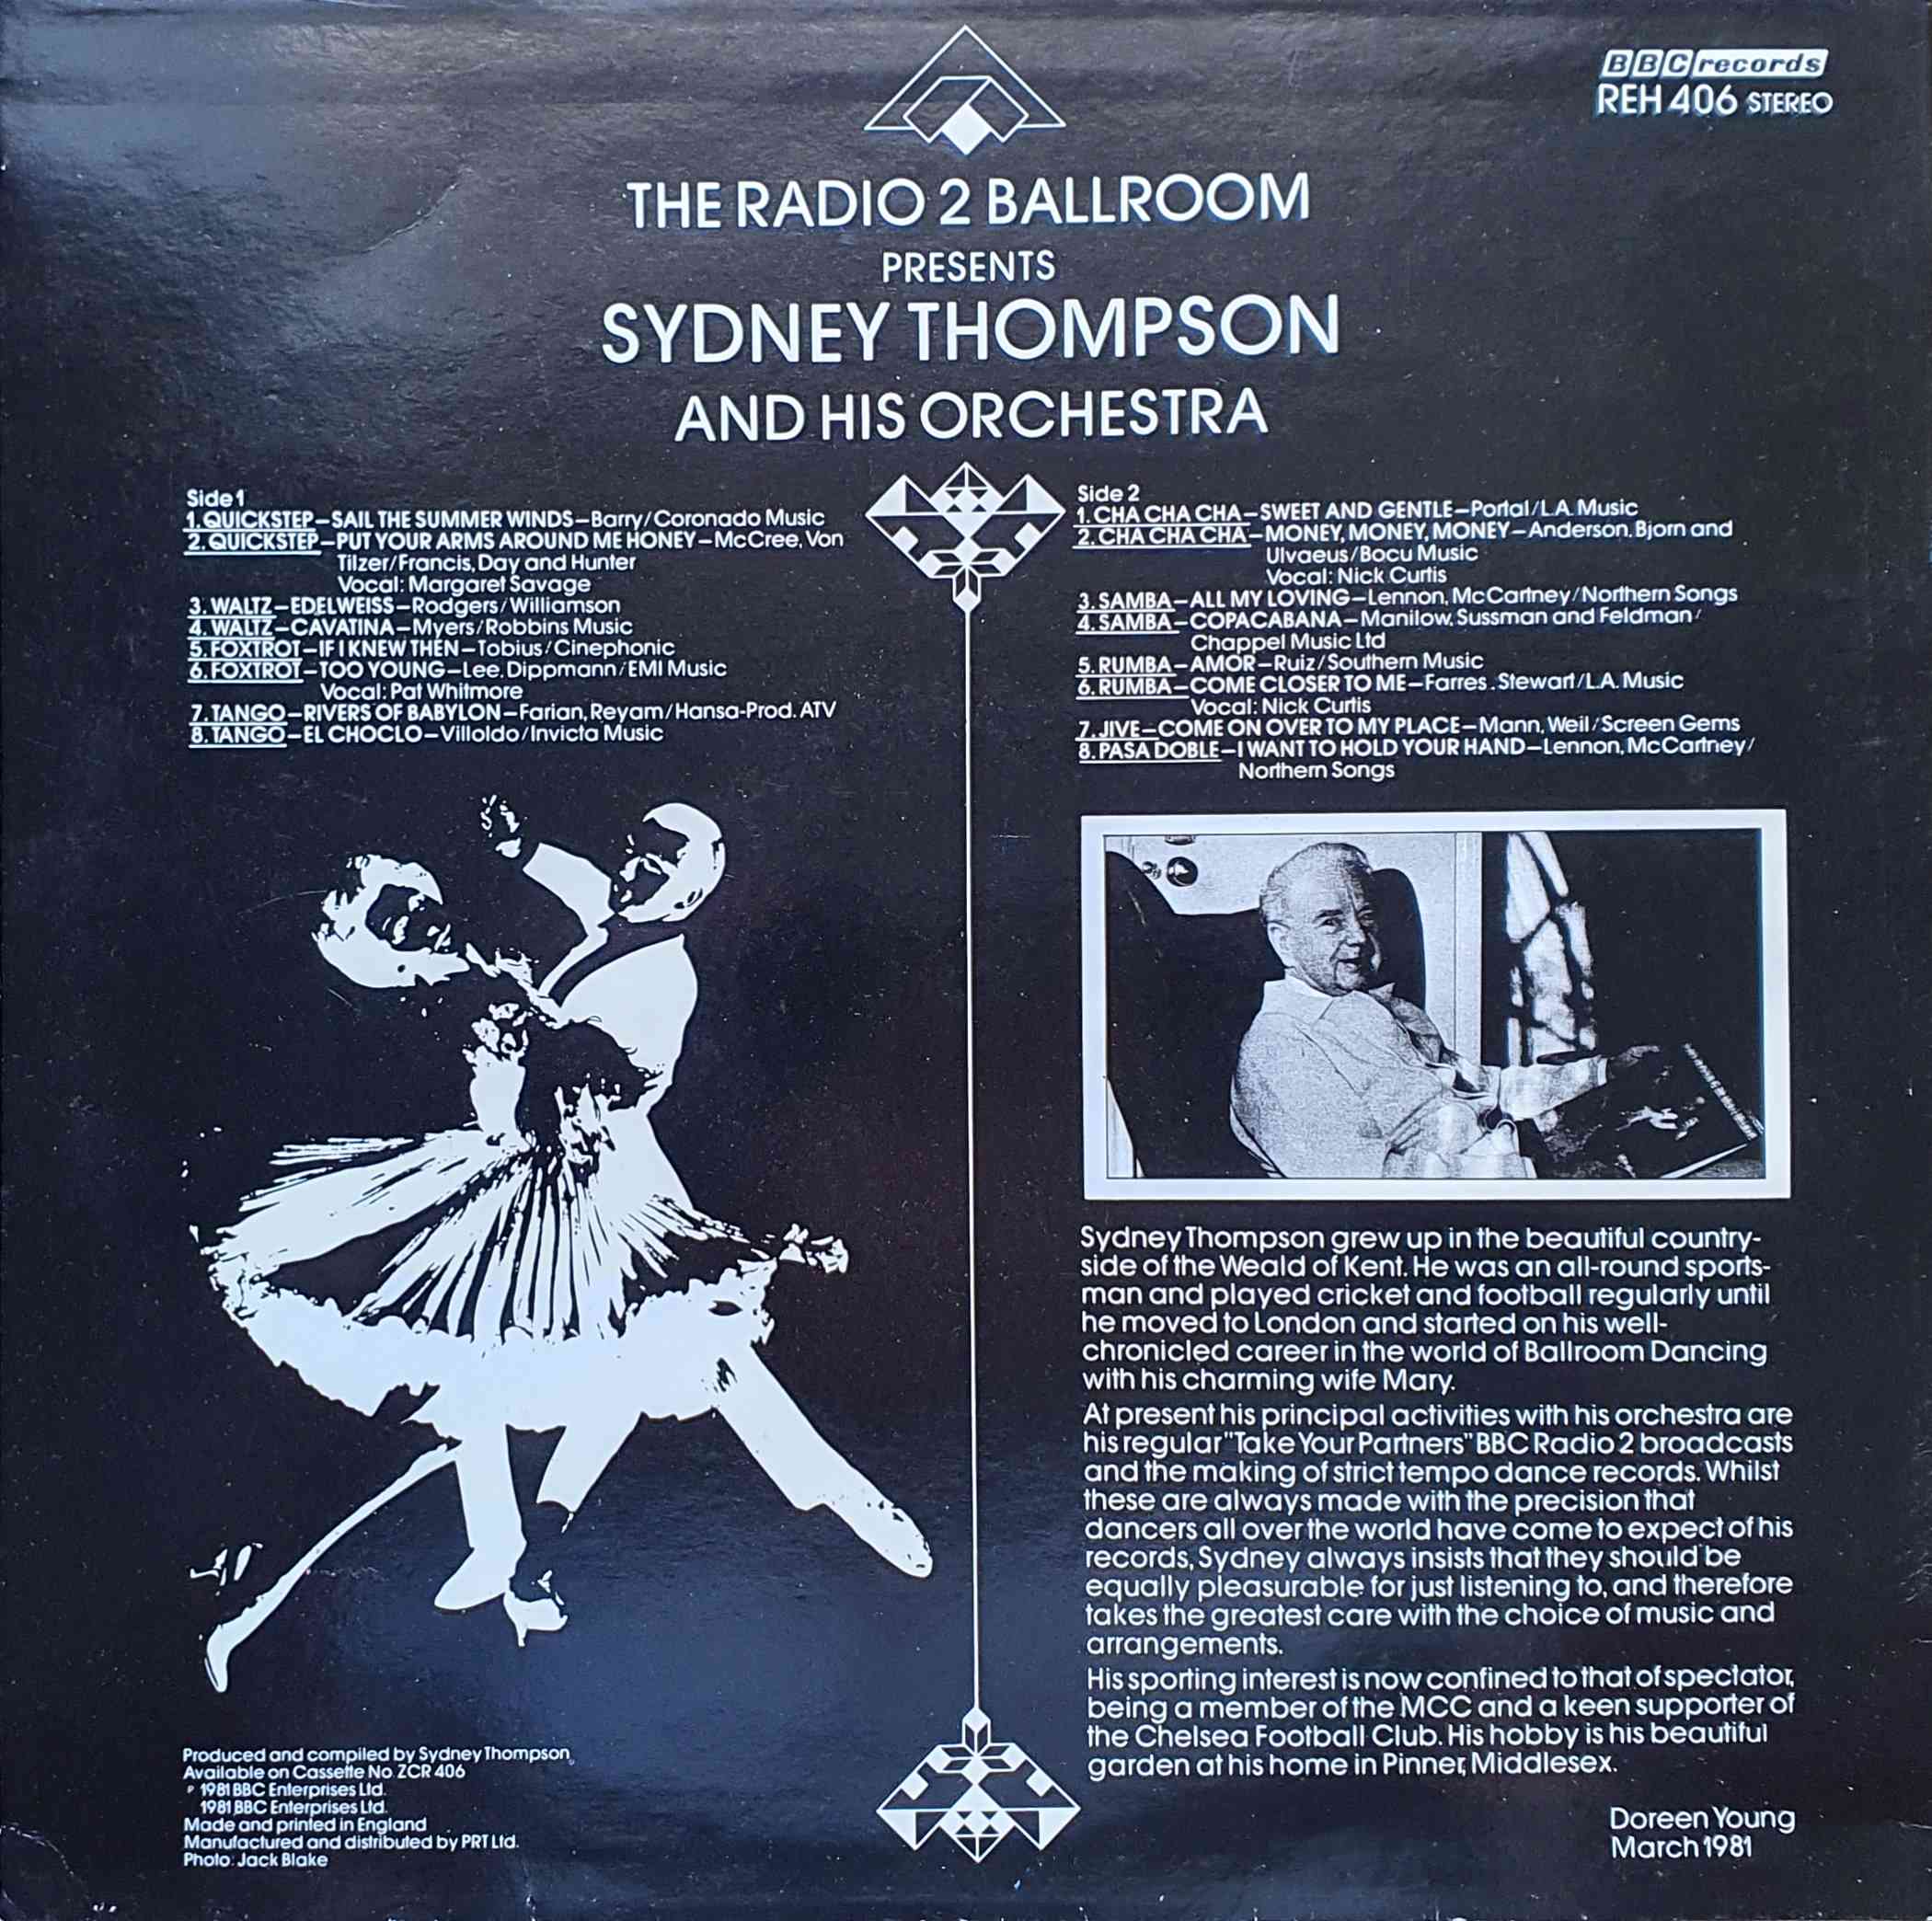 Picture of REH 406 Radio 2 ballroom: Sydney Thompson and his orchestra by artist Sydney Thompson from the BBC records and Tapes library